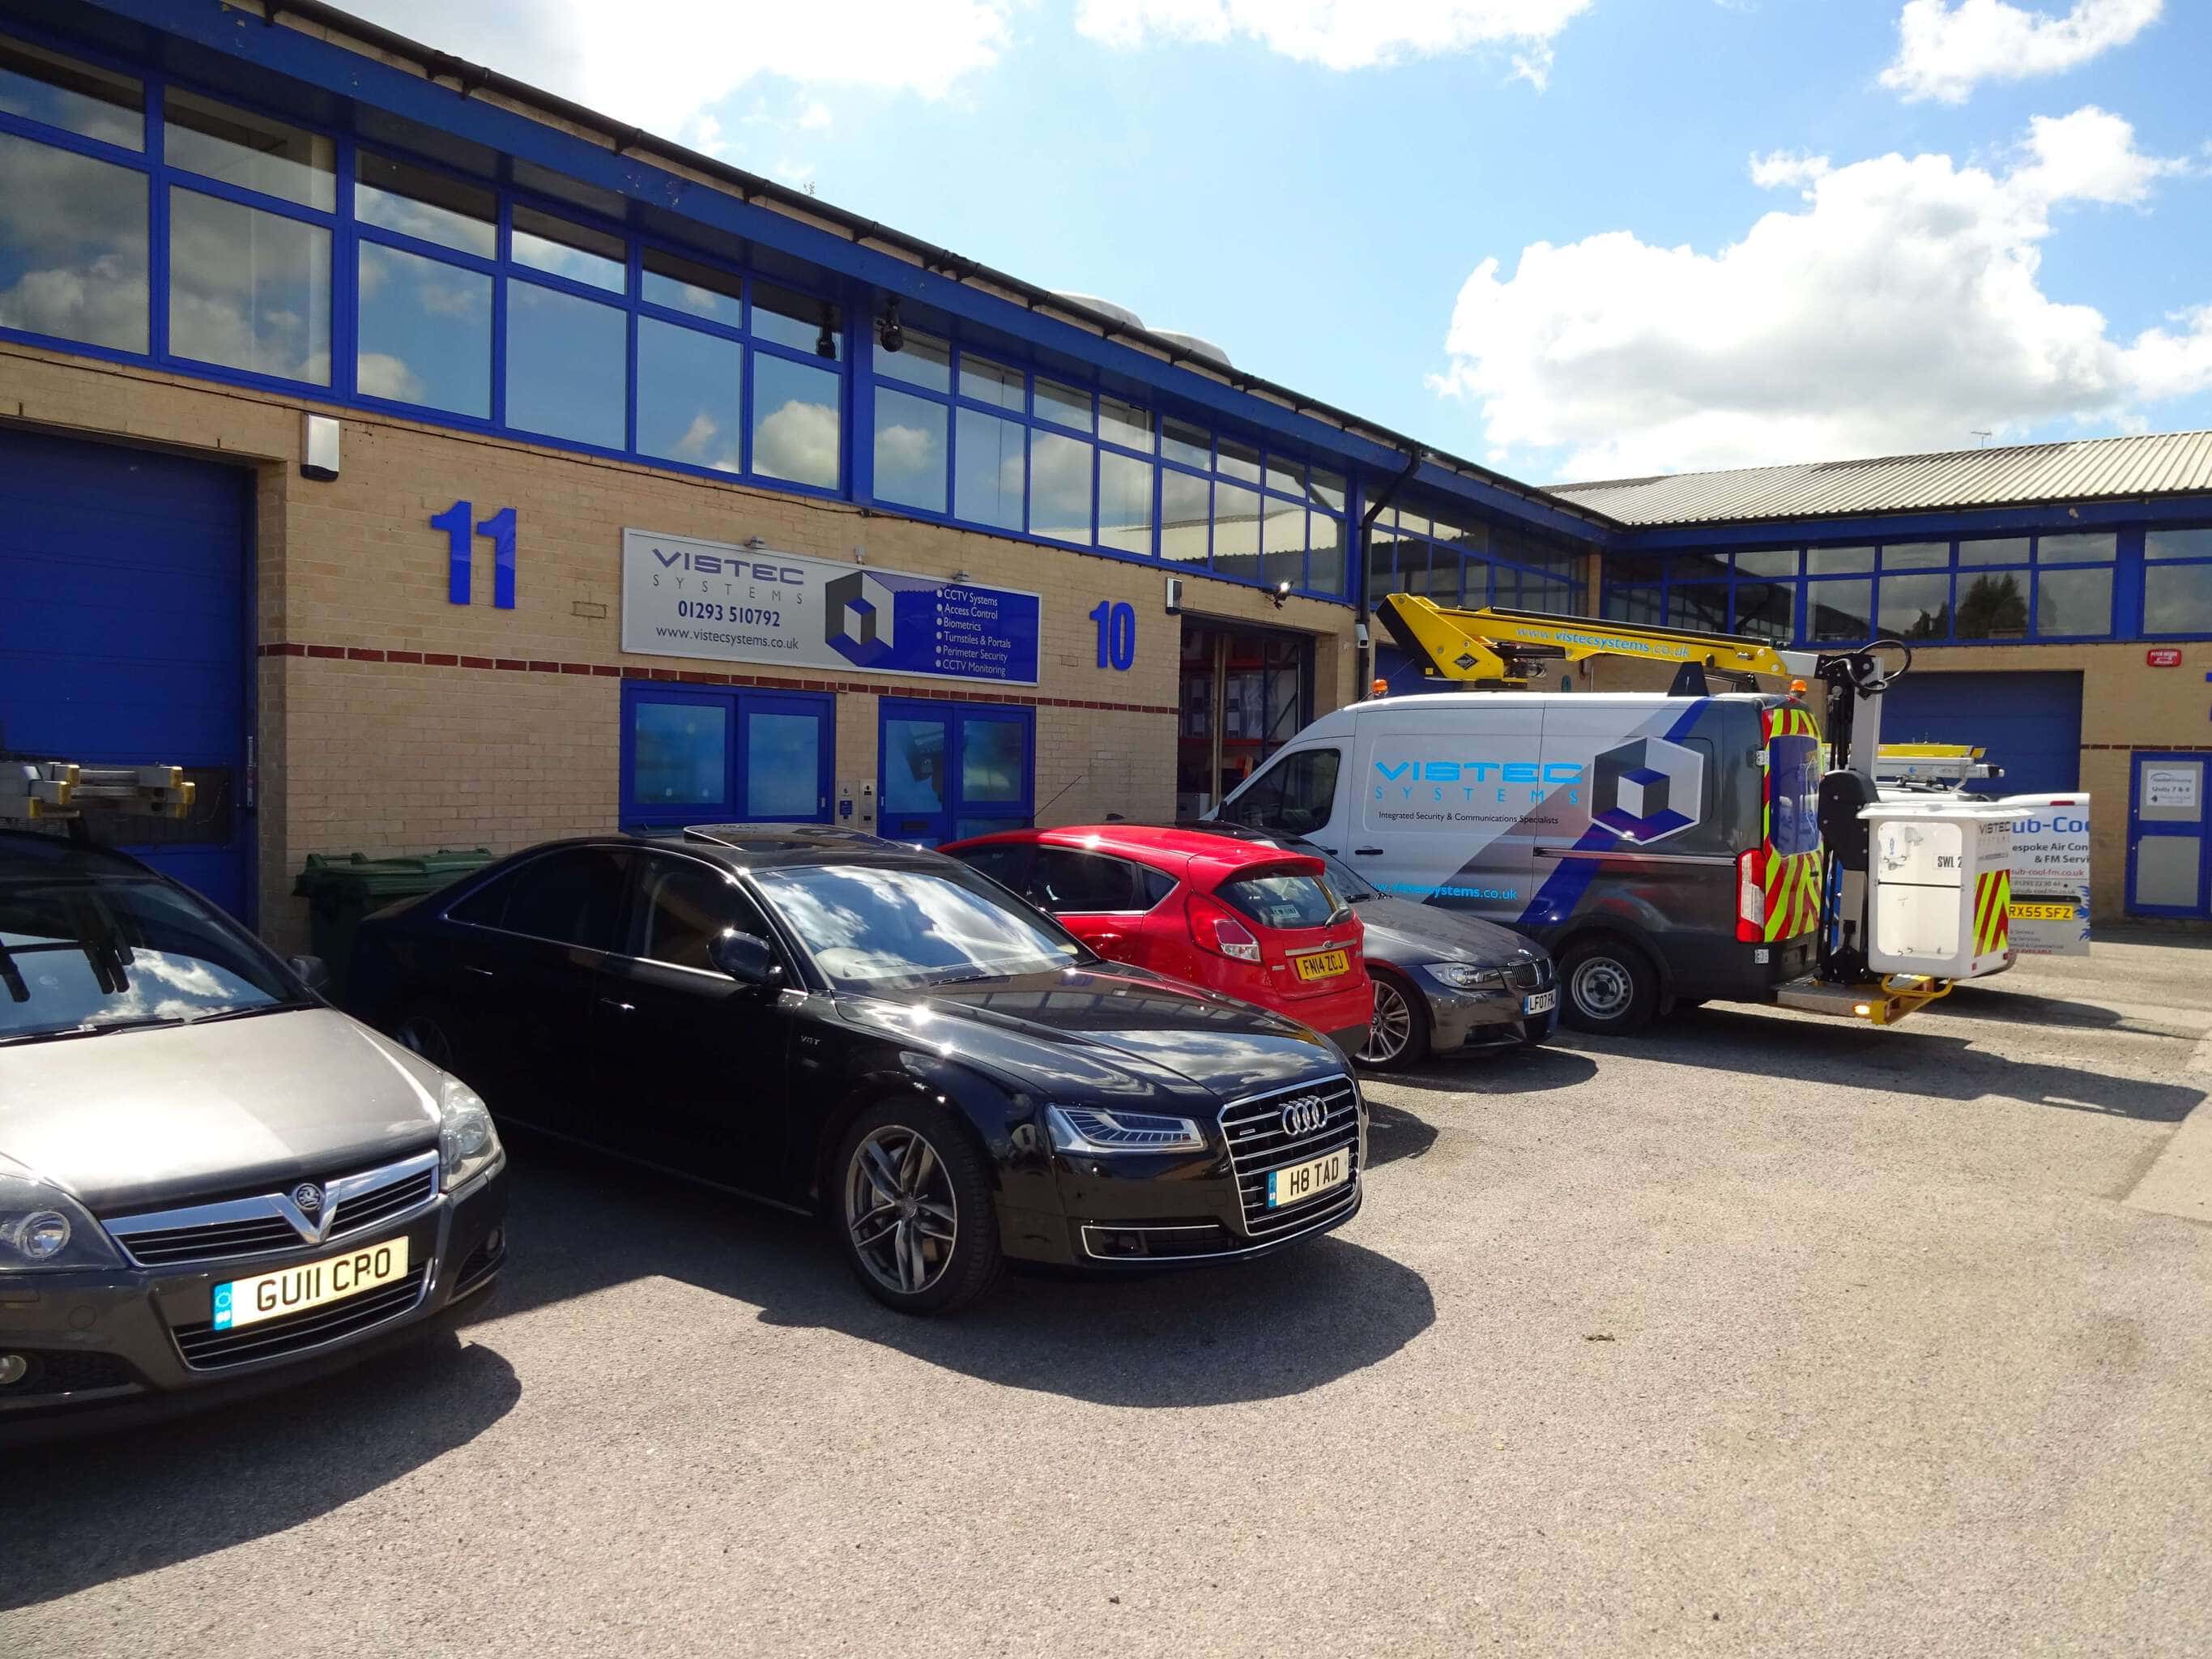 Commercial Air Conditioning West Sussex Project